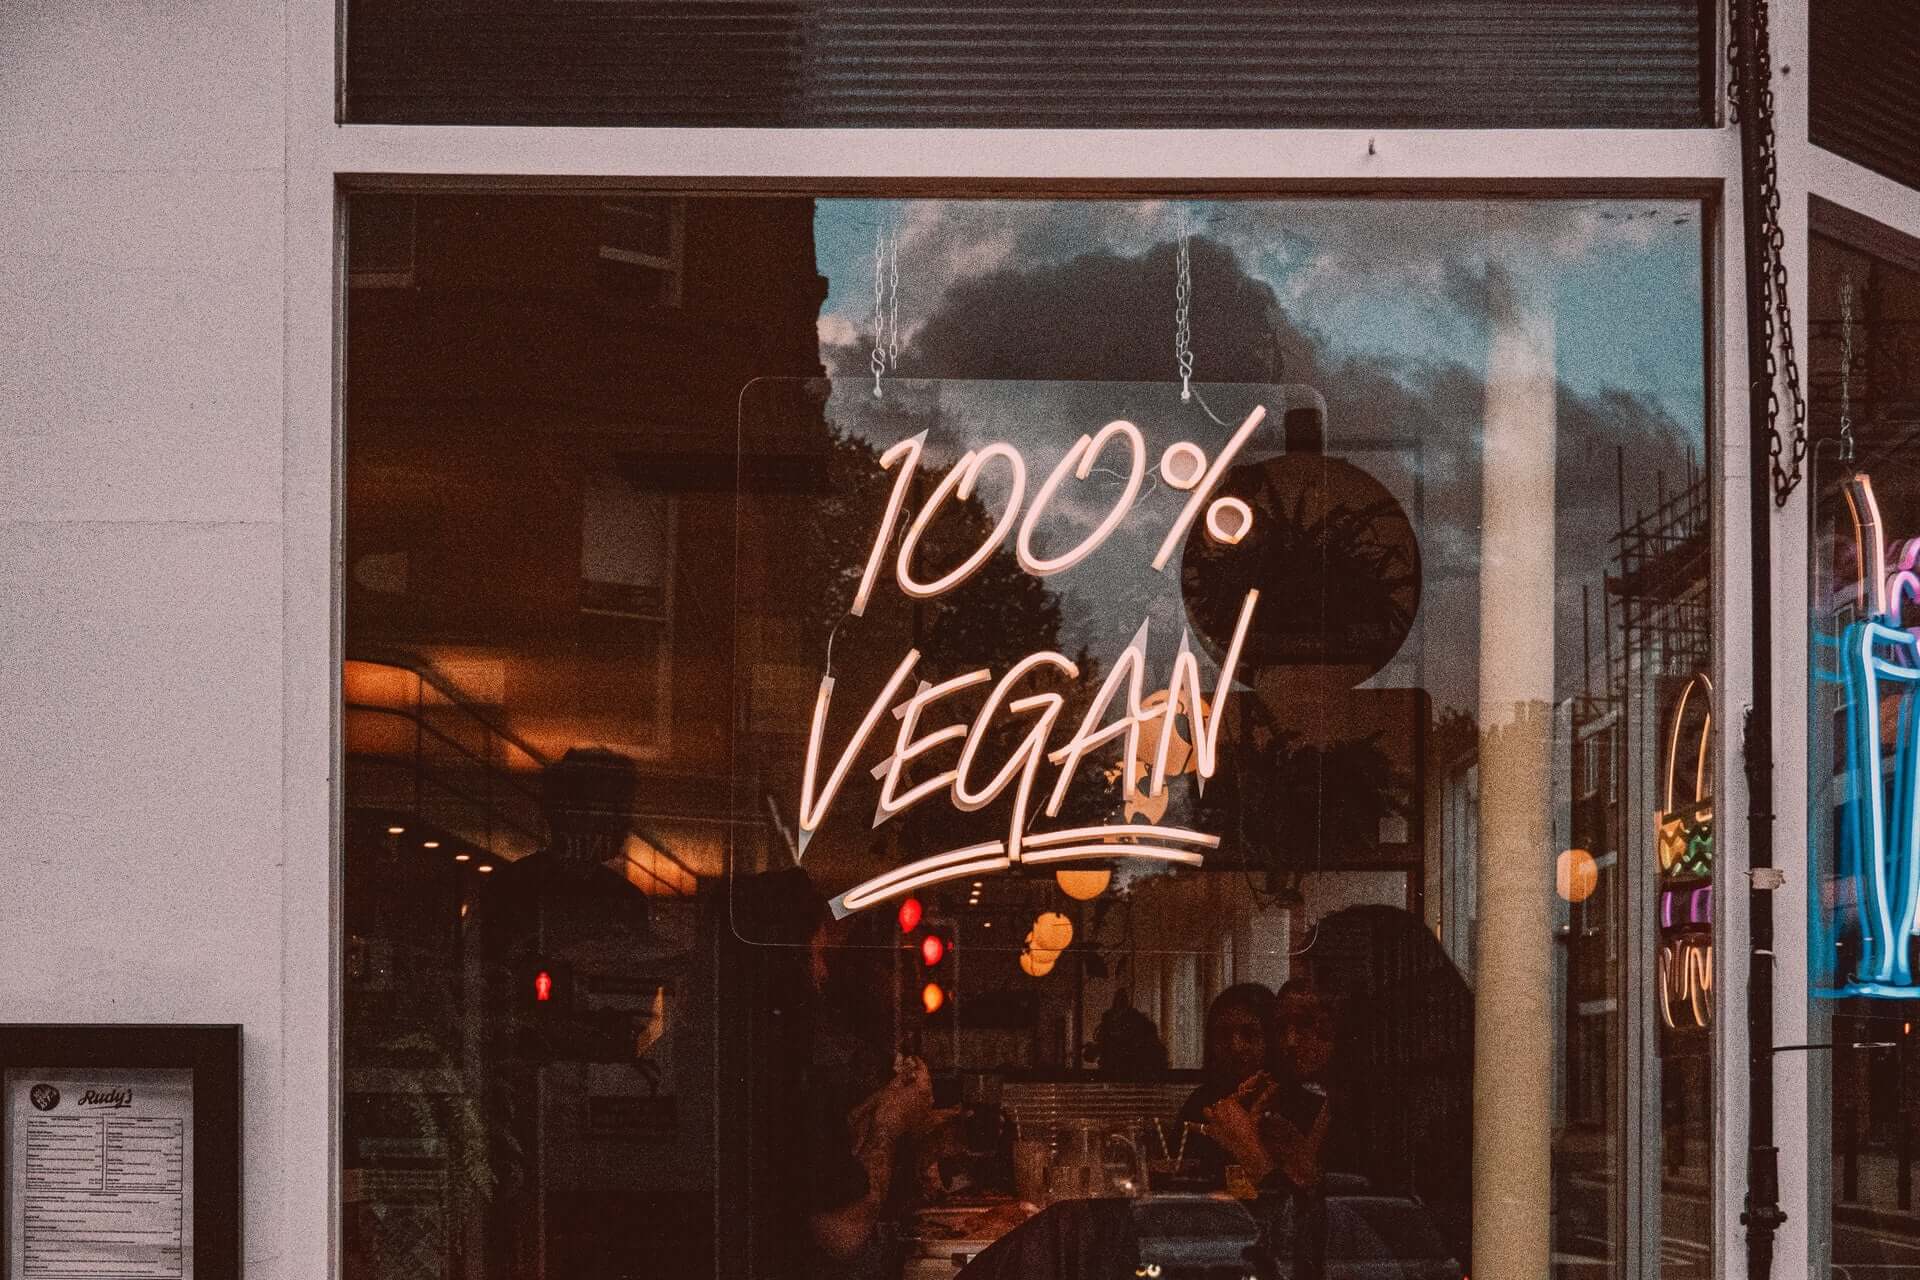 The Most Vegan Friendly Places in the World: Explore Vegan-Friendly Travel Destinations